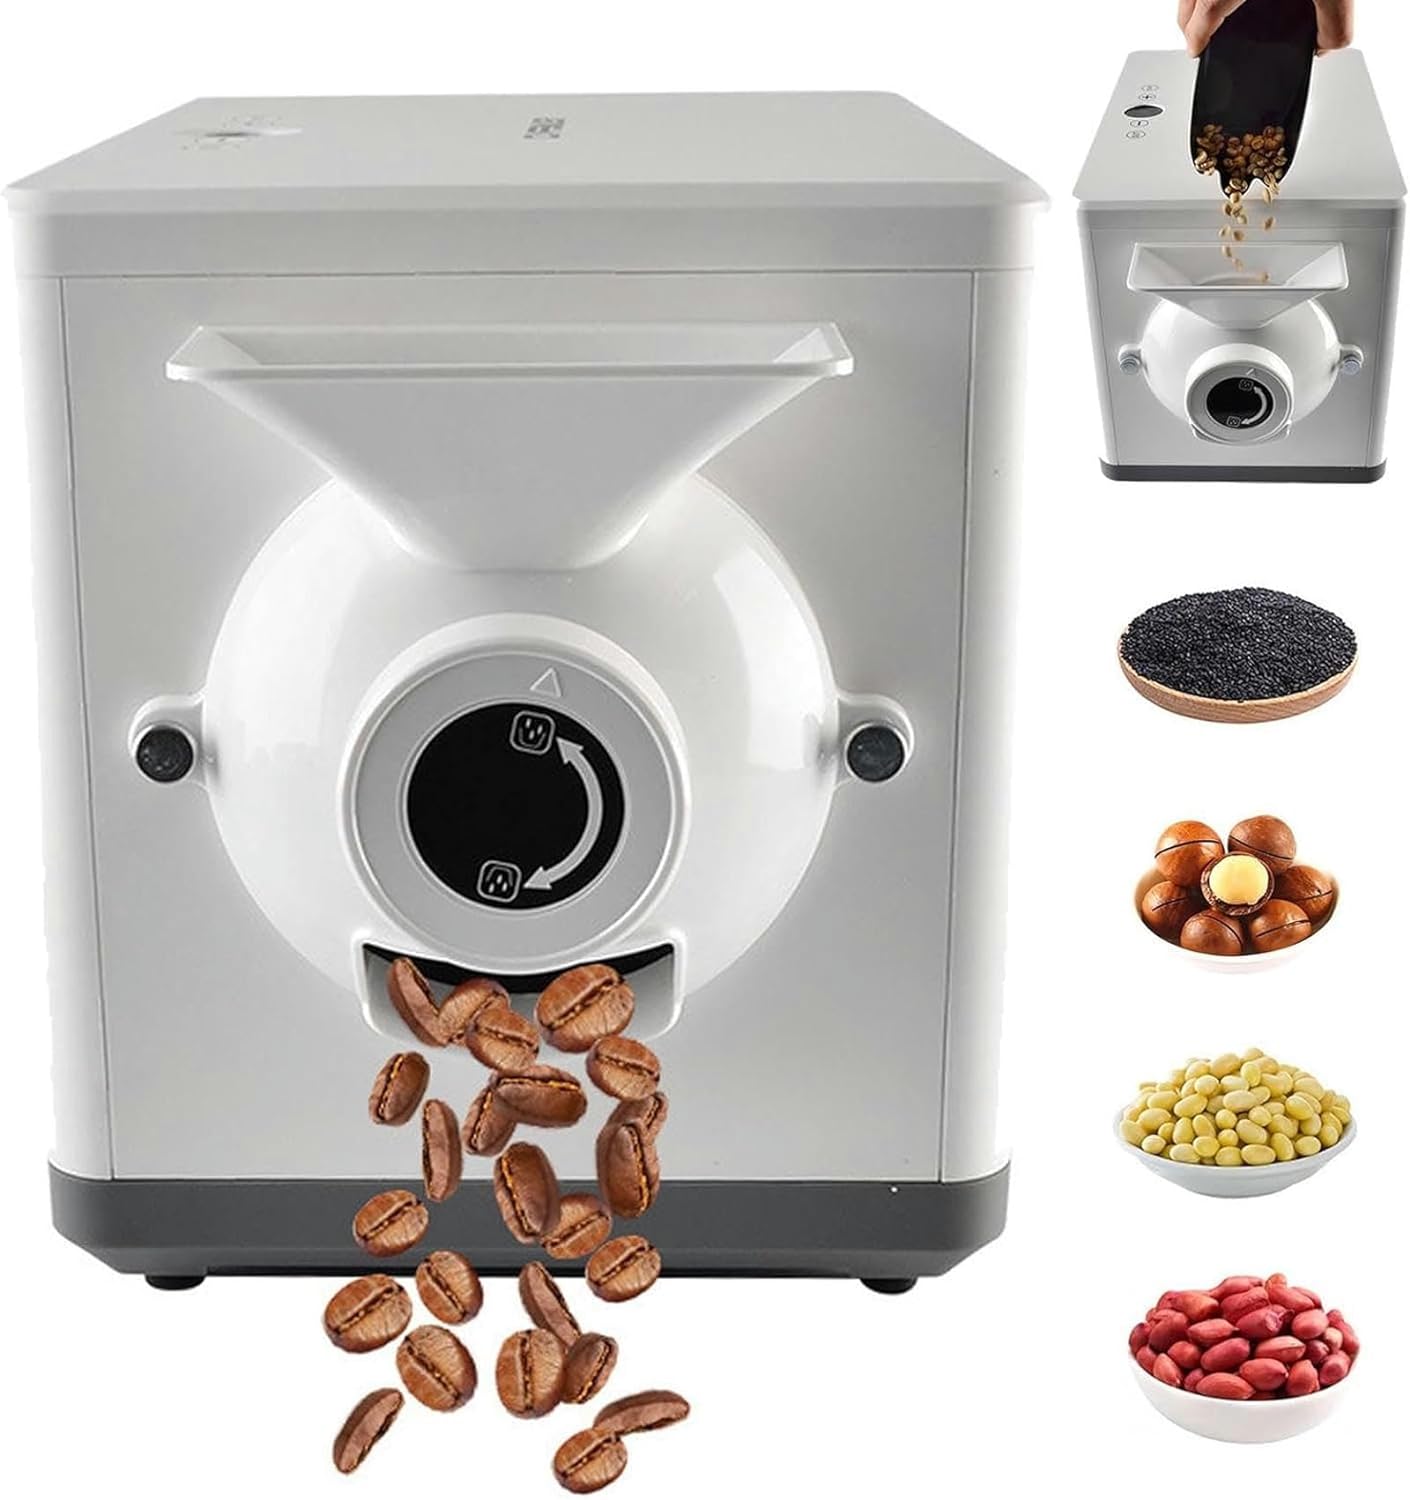 Cnaohghn Commercial Coffee Roasting Machine, 1500G Automatic Coffee Bean Roaster,Stainless Steel Liner,Timing (30S-90Min) + Temperature Control (100℃-250℃),1600W,360°Even Heating